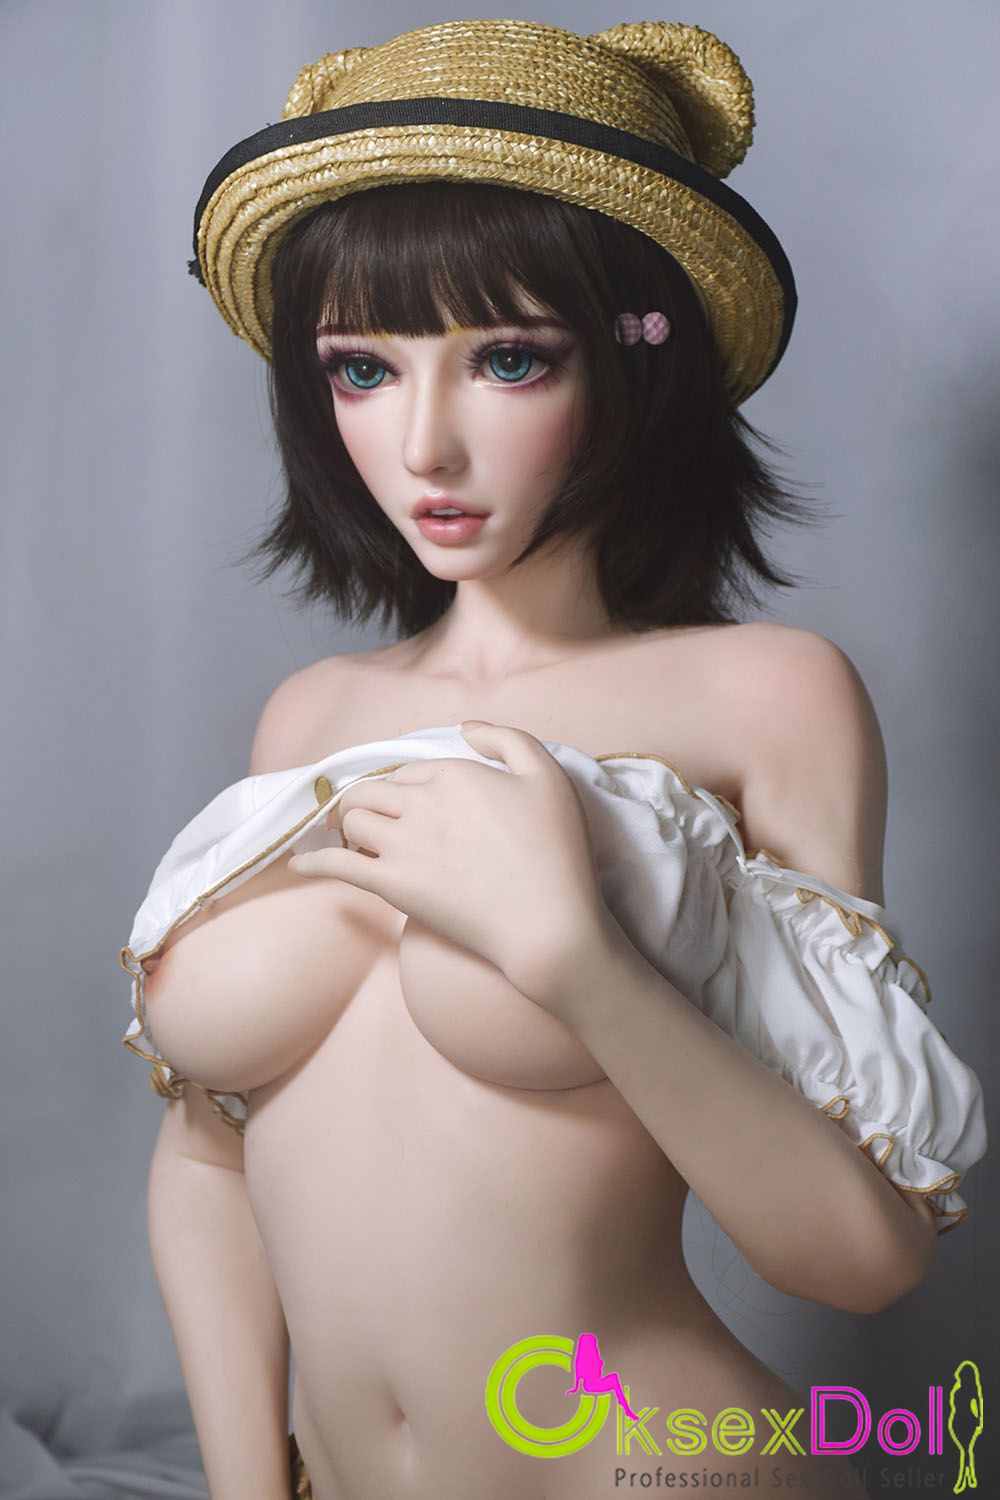 elsababe-doll.html Sex Dolls Pictures